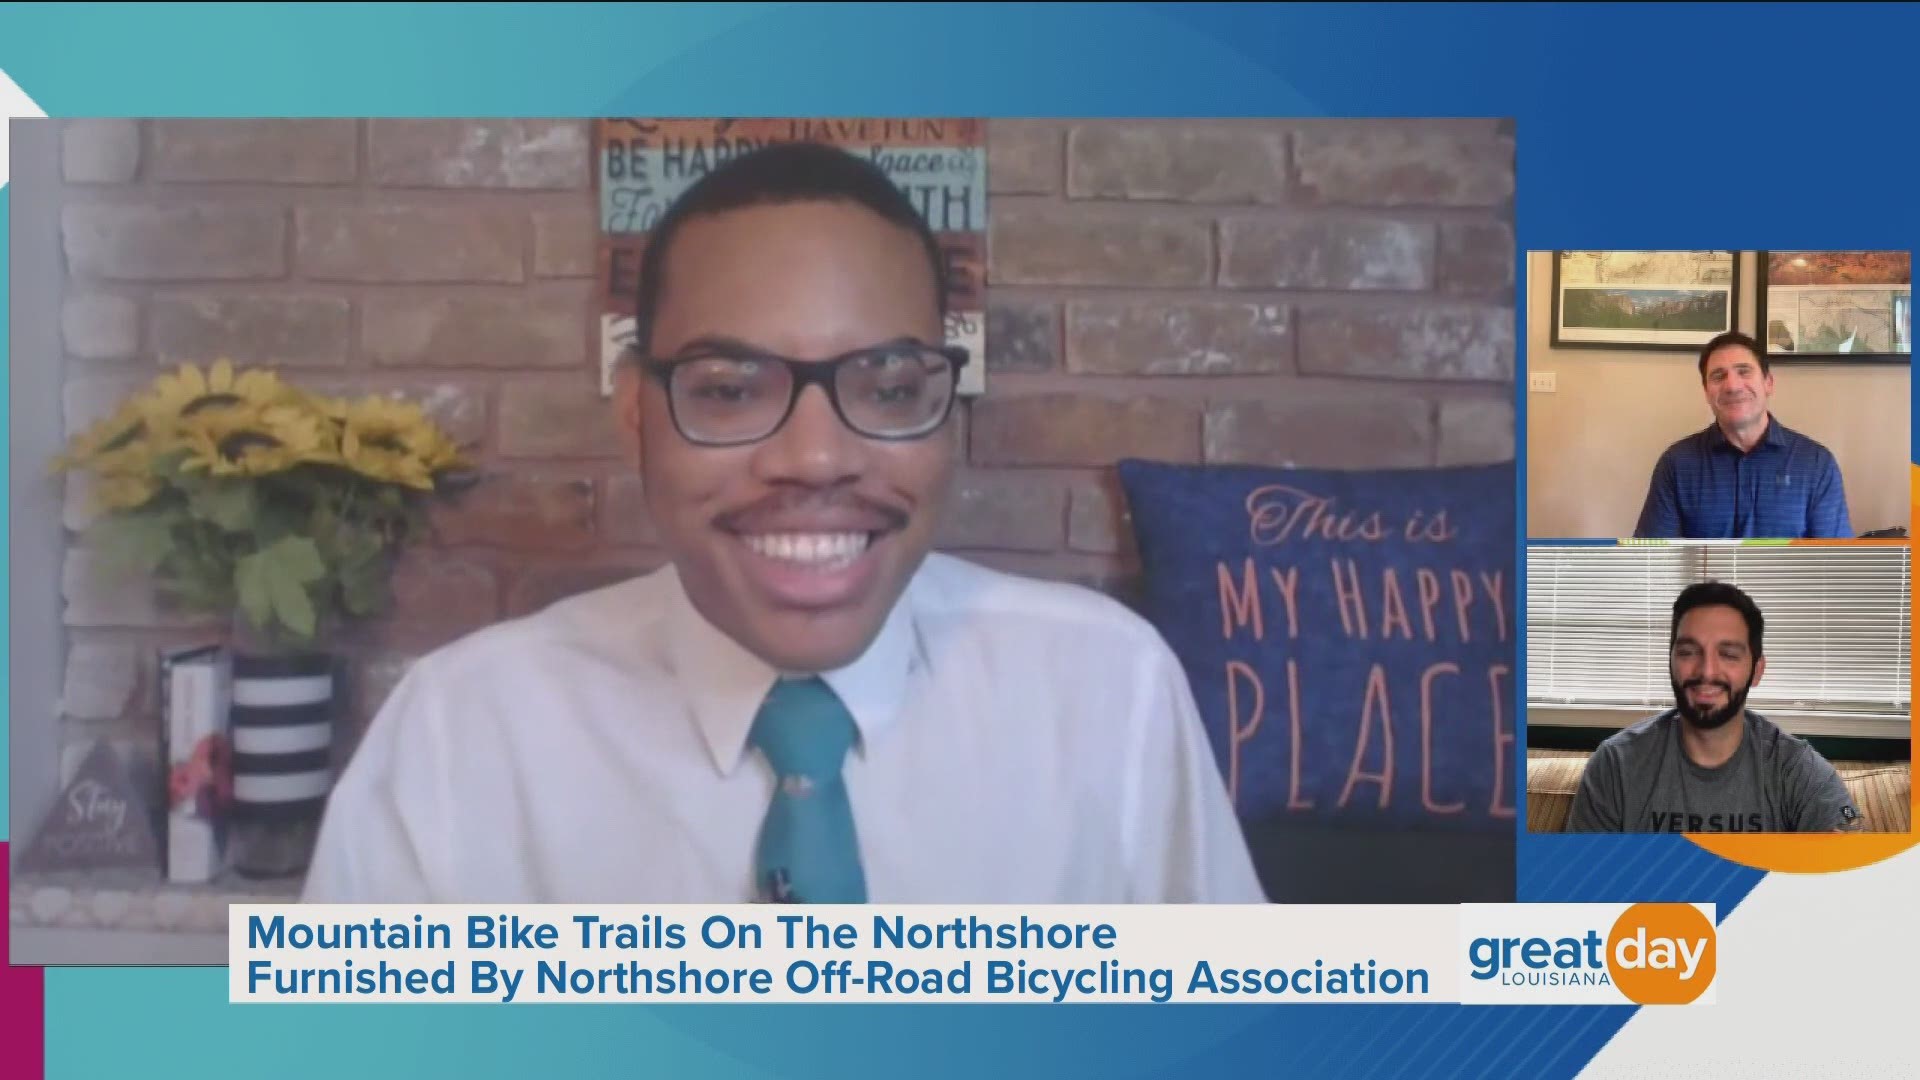 Members of the Northshore Off-Road Bicycling Association shared details about the new mountain bike trails suitable for all ages.